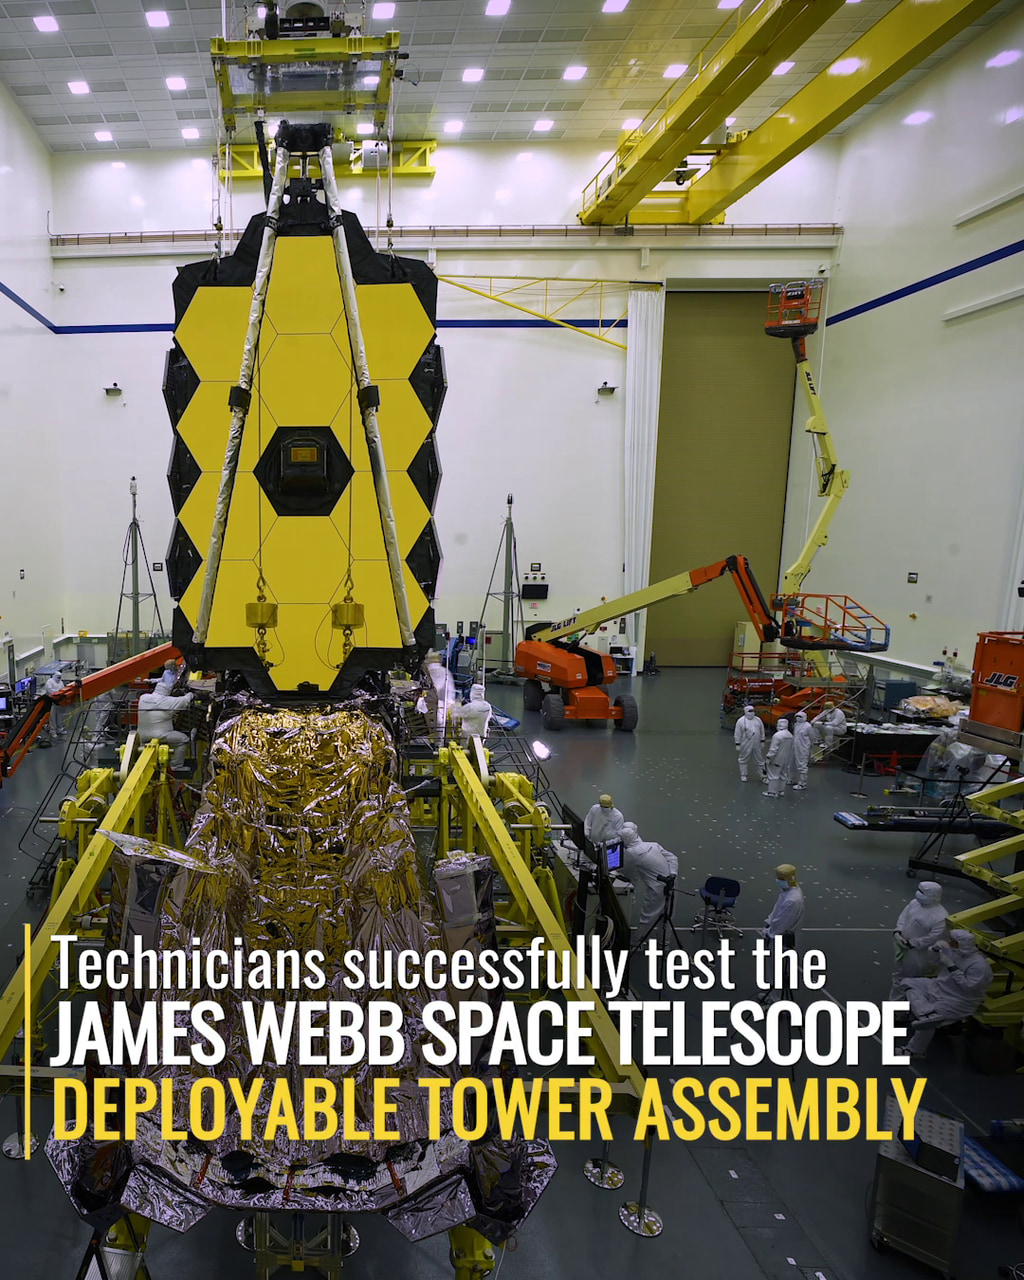 IG Story Part 1:  Technicians test the James Webb Space Telescope's Deployable Tower Assembly in the cleanroom.  Instagram Video release version.Music credit: Universal Production Music: Timelapse Clouds by Blythe Joustra